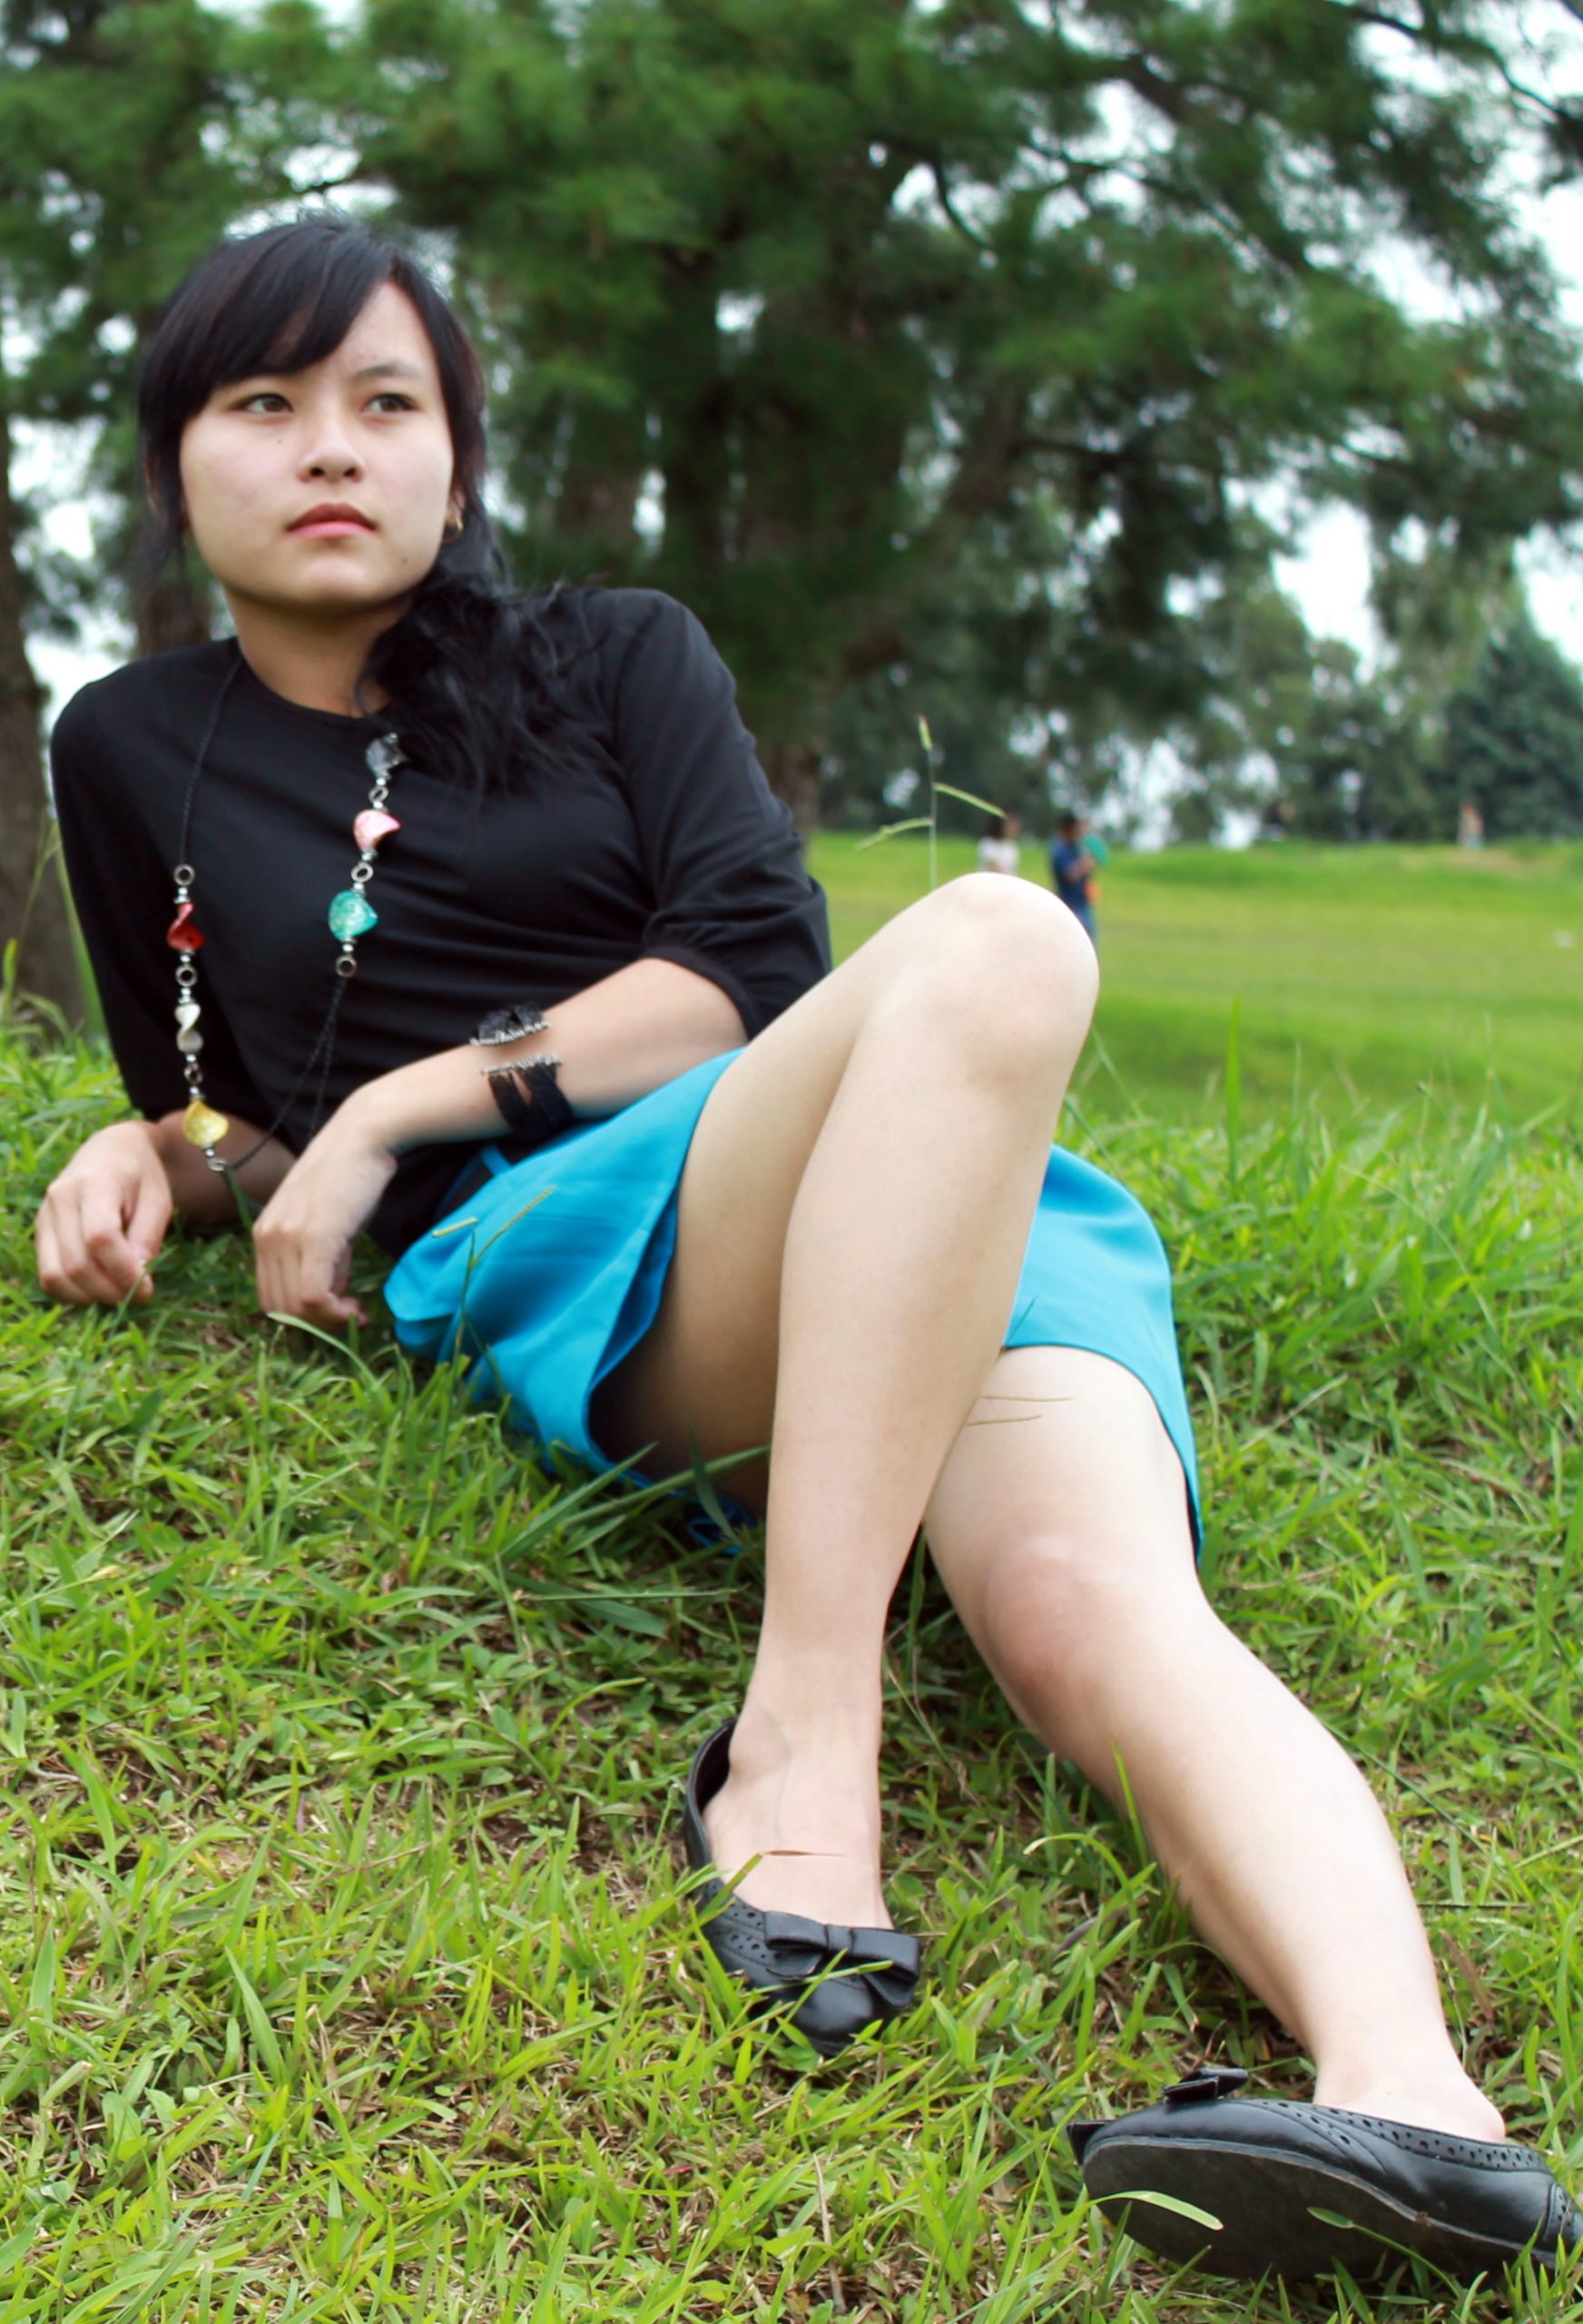 A girl laying on grass